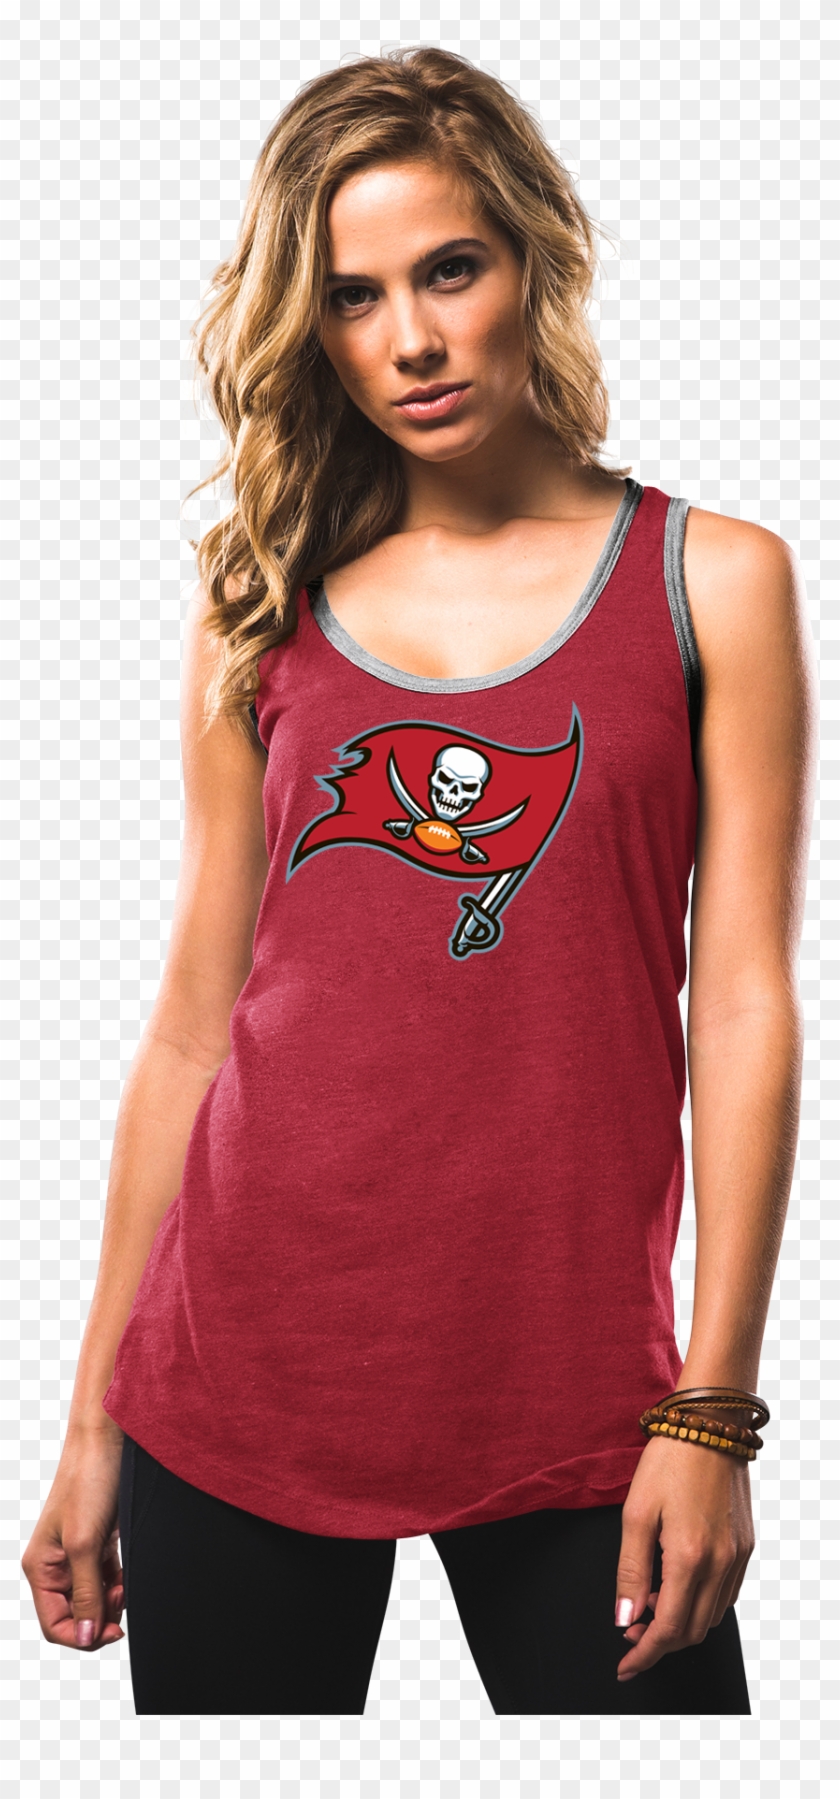 Majestic Buccaneers Women's Heather Red Tested Tank - Tampa Bay Buccaneers Clipart